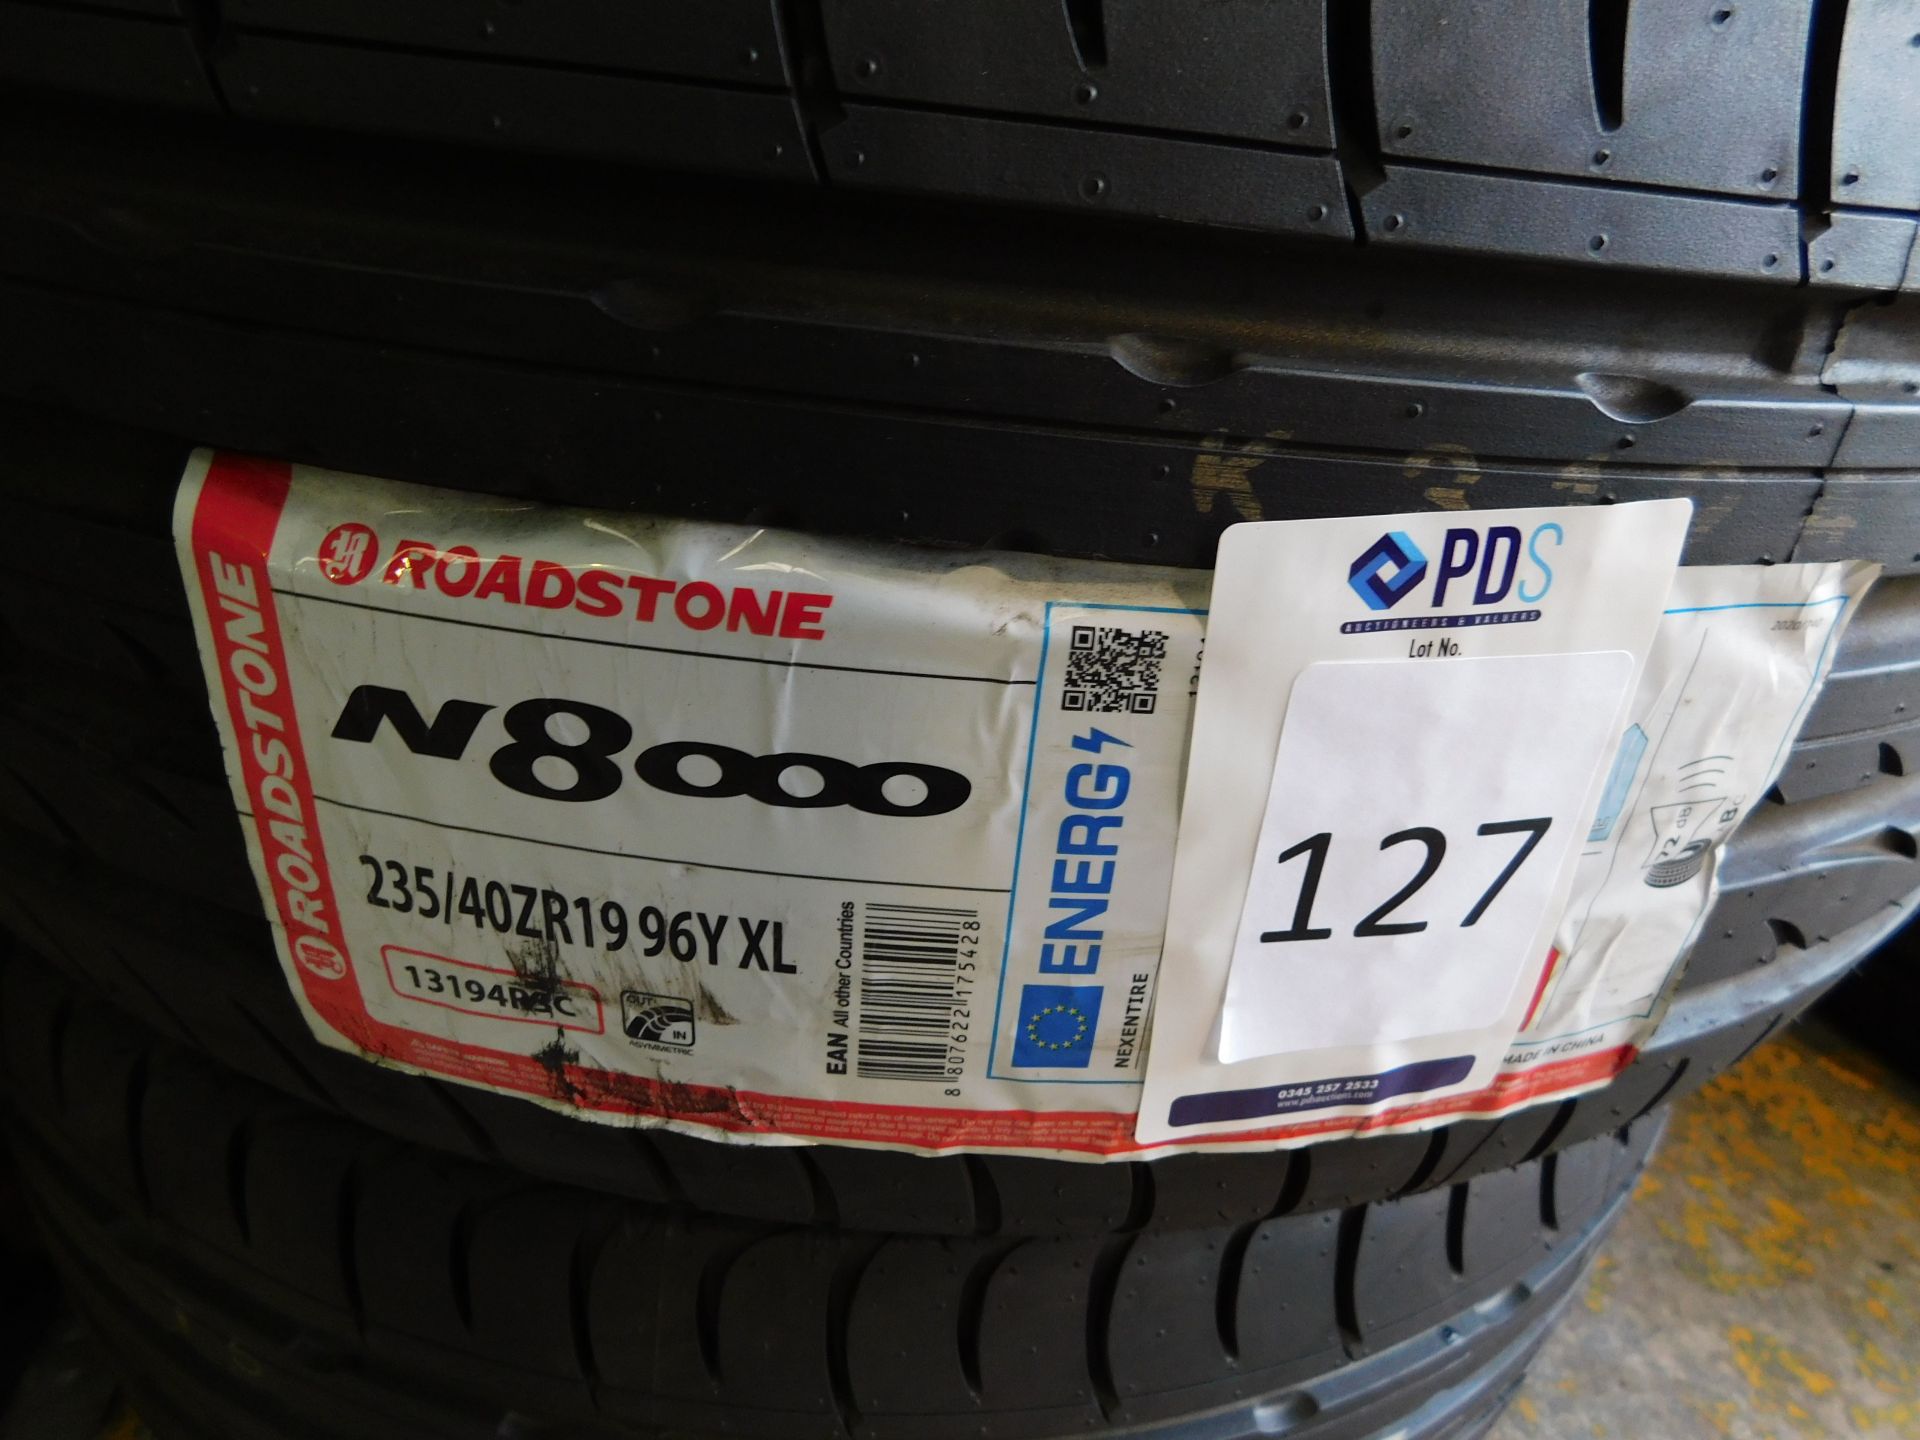 2 tyres, size 235/40 19 (Roadstone) (Location Northampton. Please Refer to General Notes) - Image 2 of 2